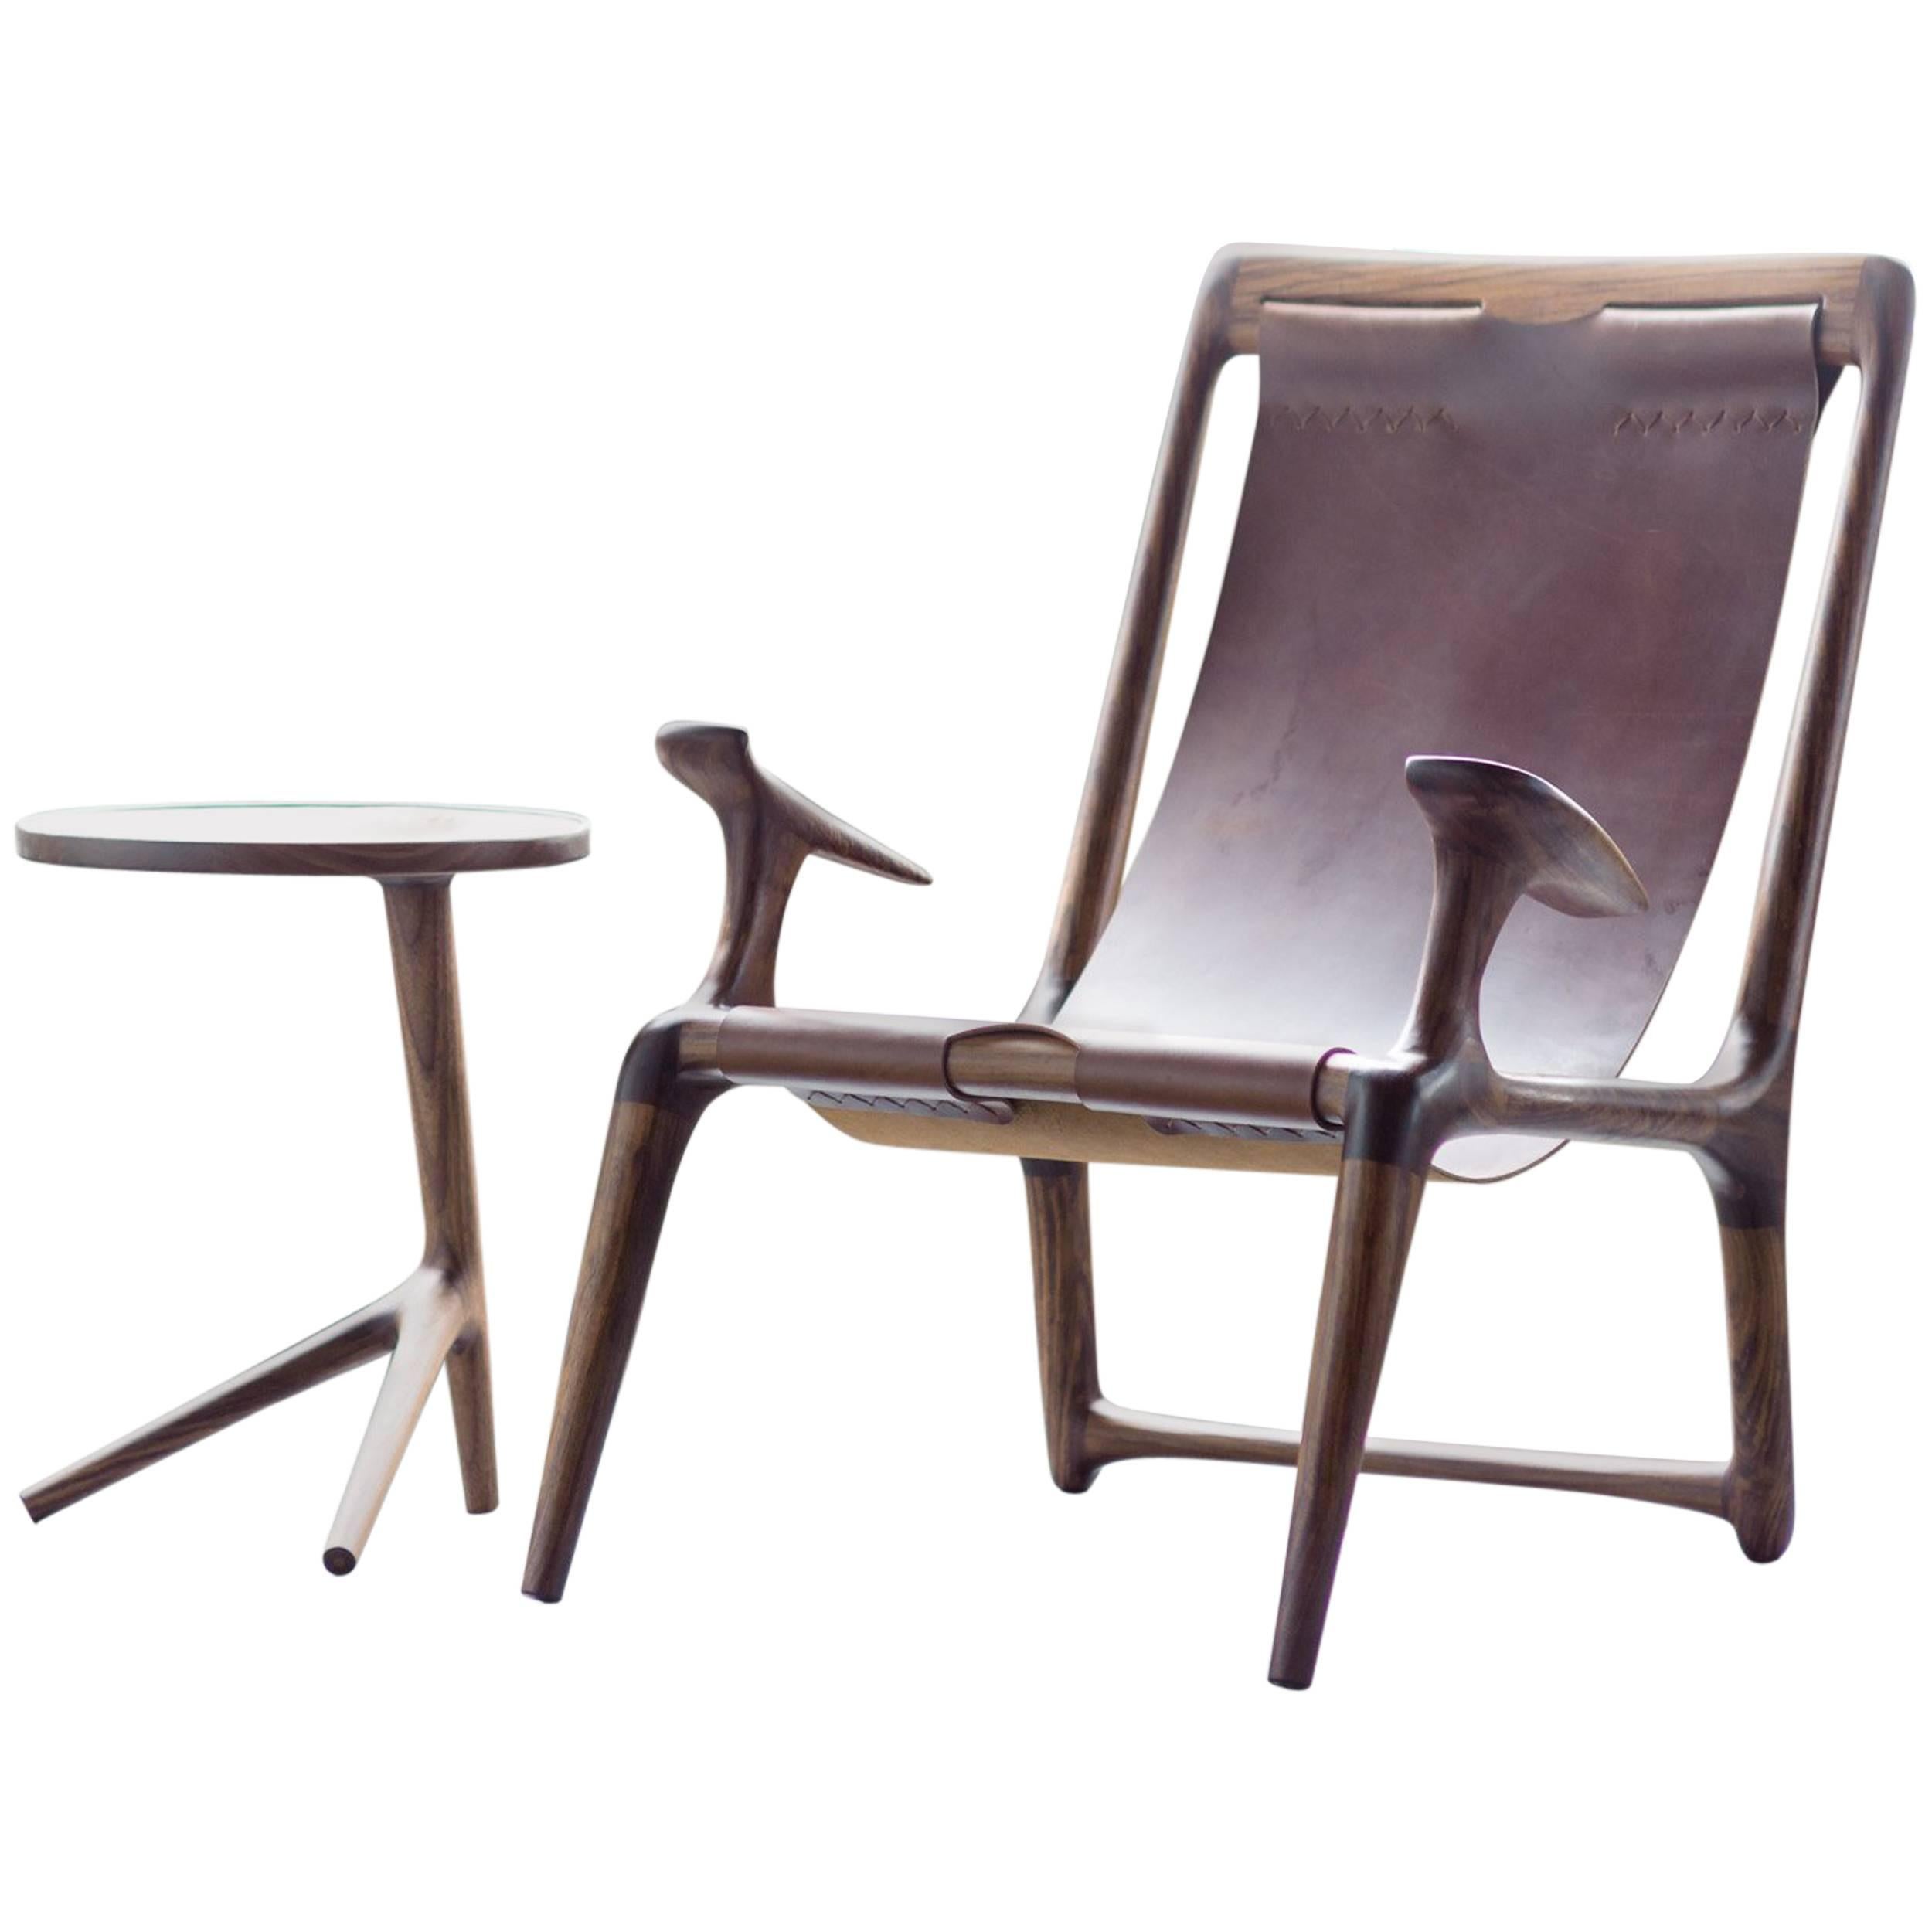 Lounge and Accent Sling Chair, Walnut and Brown Leather by Fernweh Woodworking